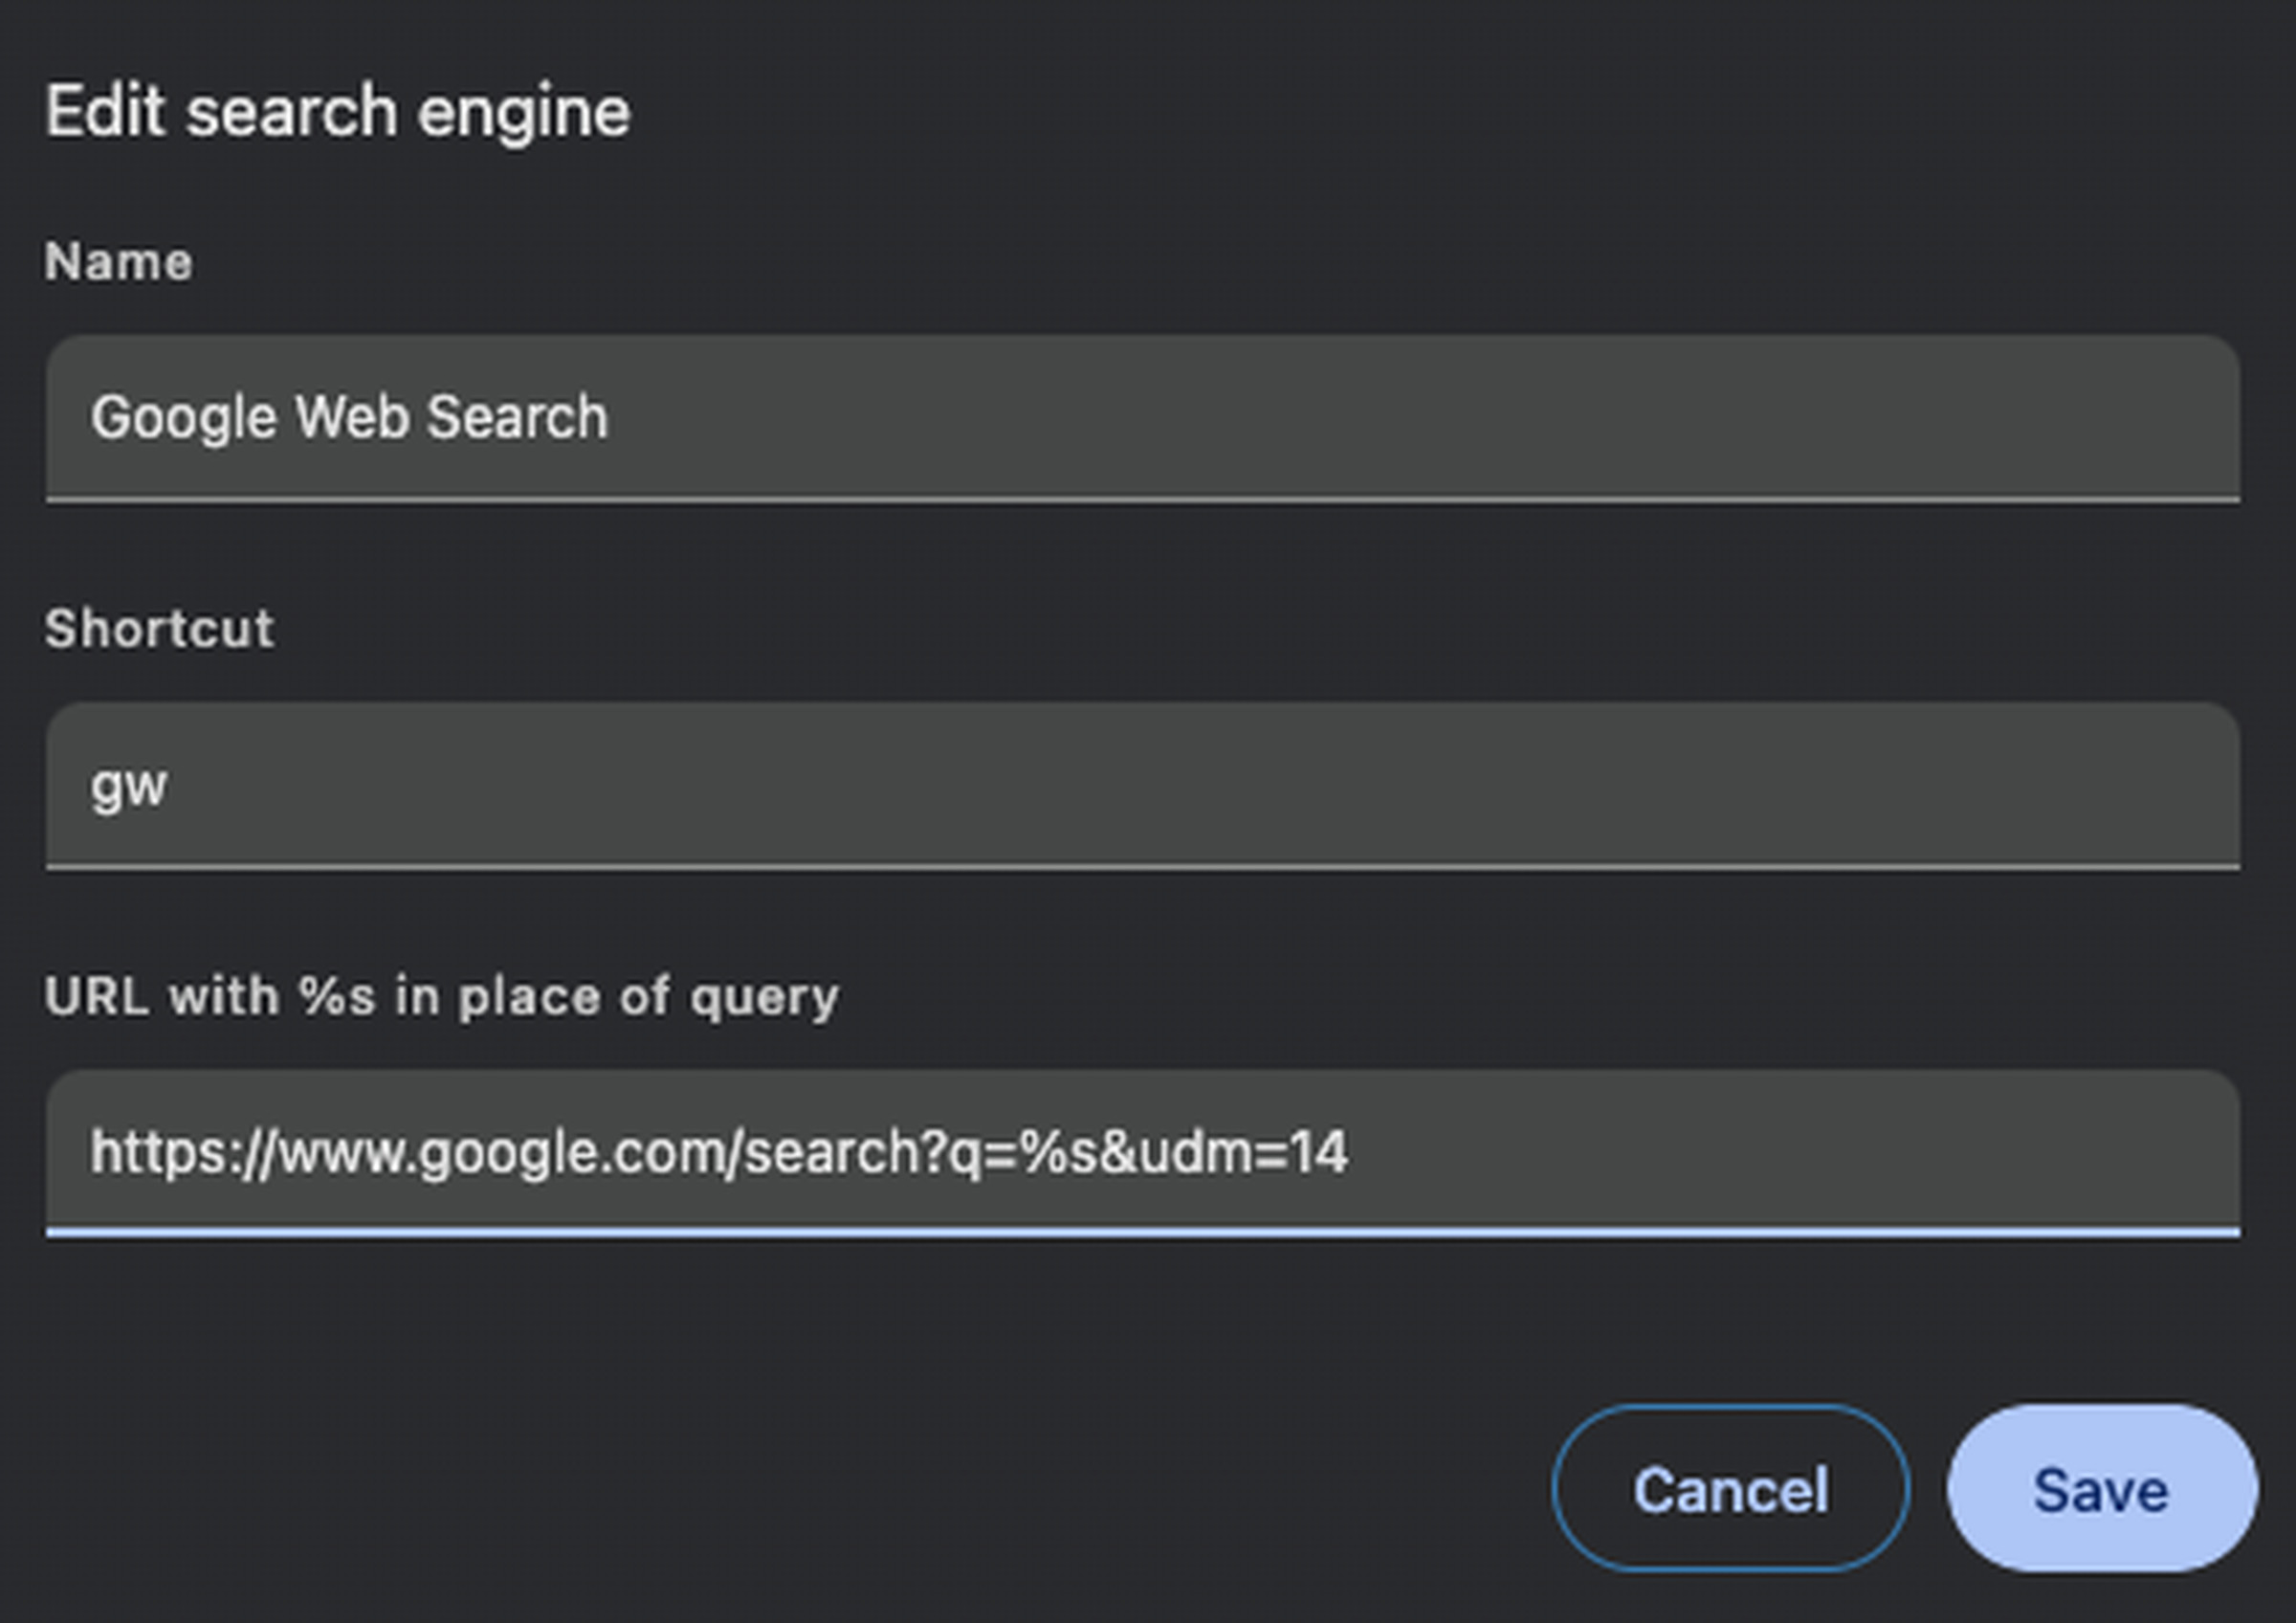 A screenshot showing three fields, filled out as follows: Name is “Google Web Search”; Shortcut is “gw”; and URL is “https://www.google.com/search?q=%s&amp;udm=14”